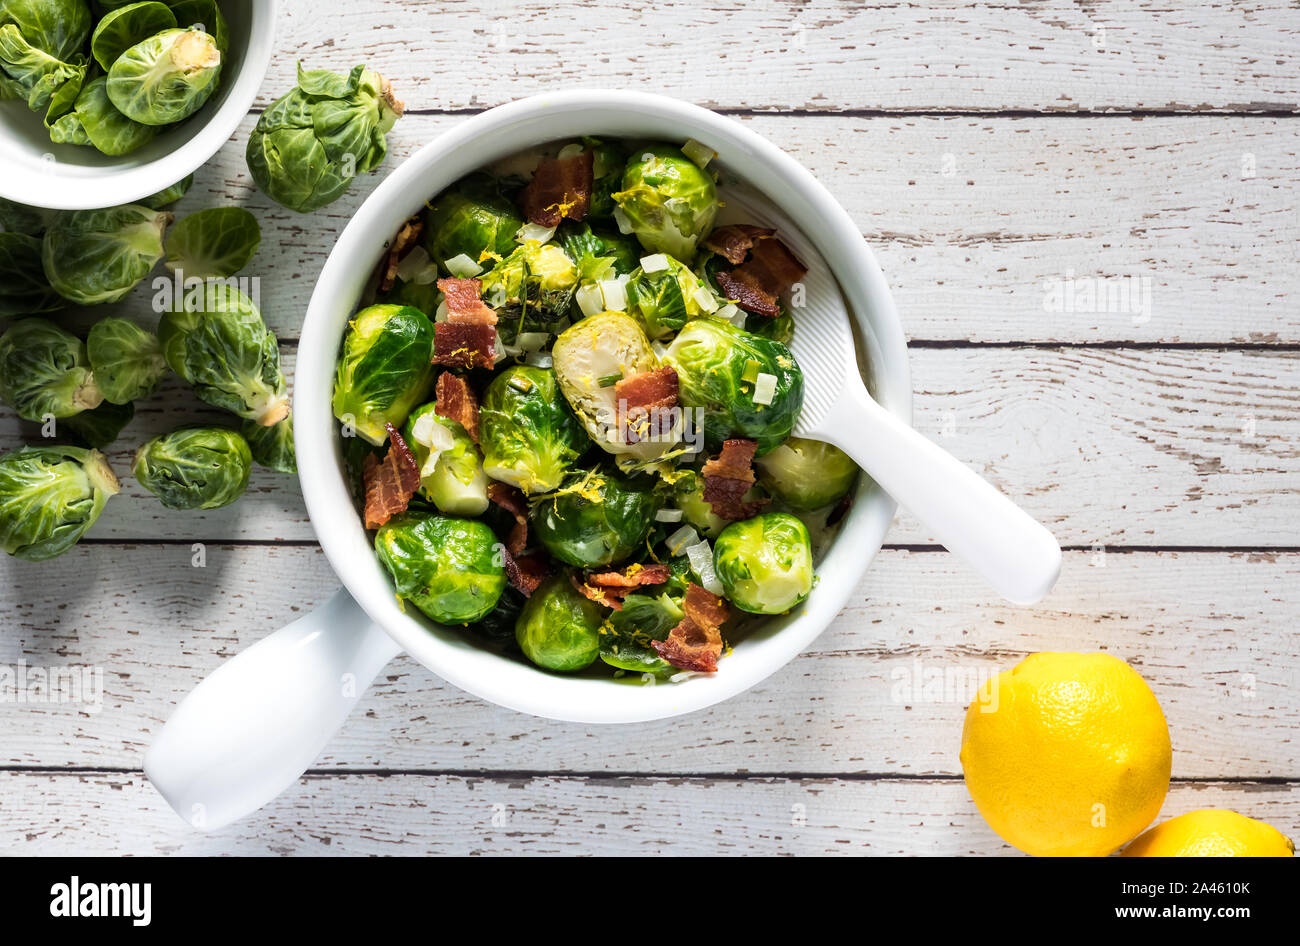 Cooked Brussel sprouts. Stock Photo